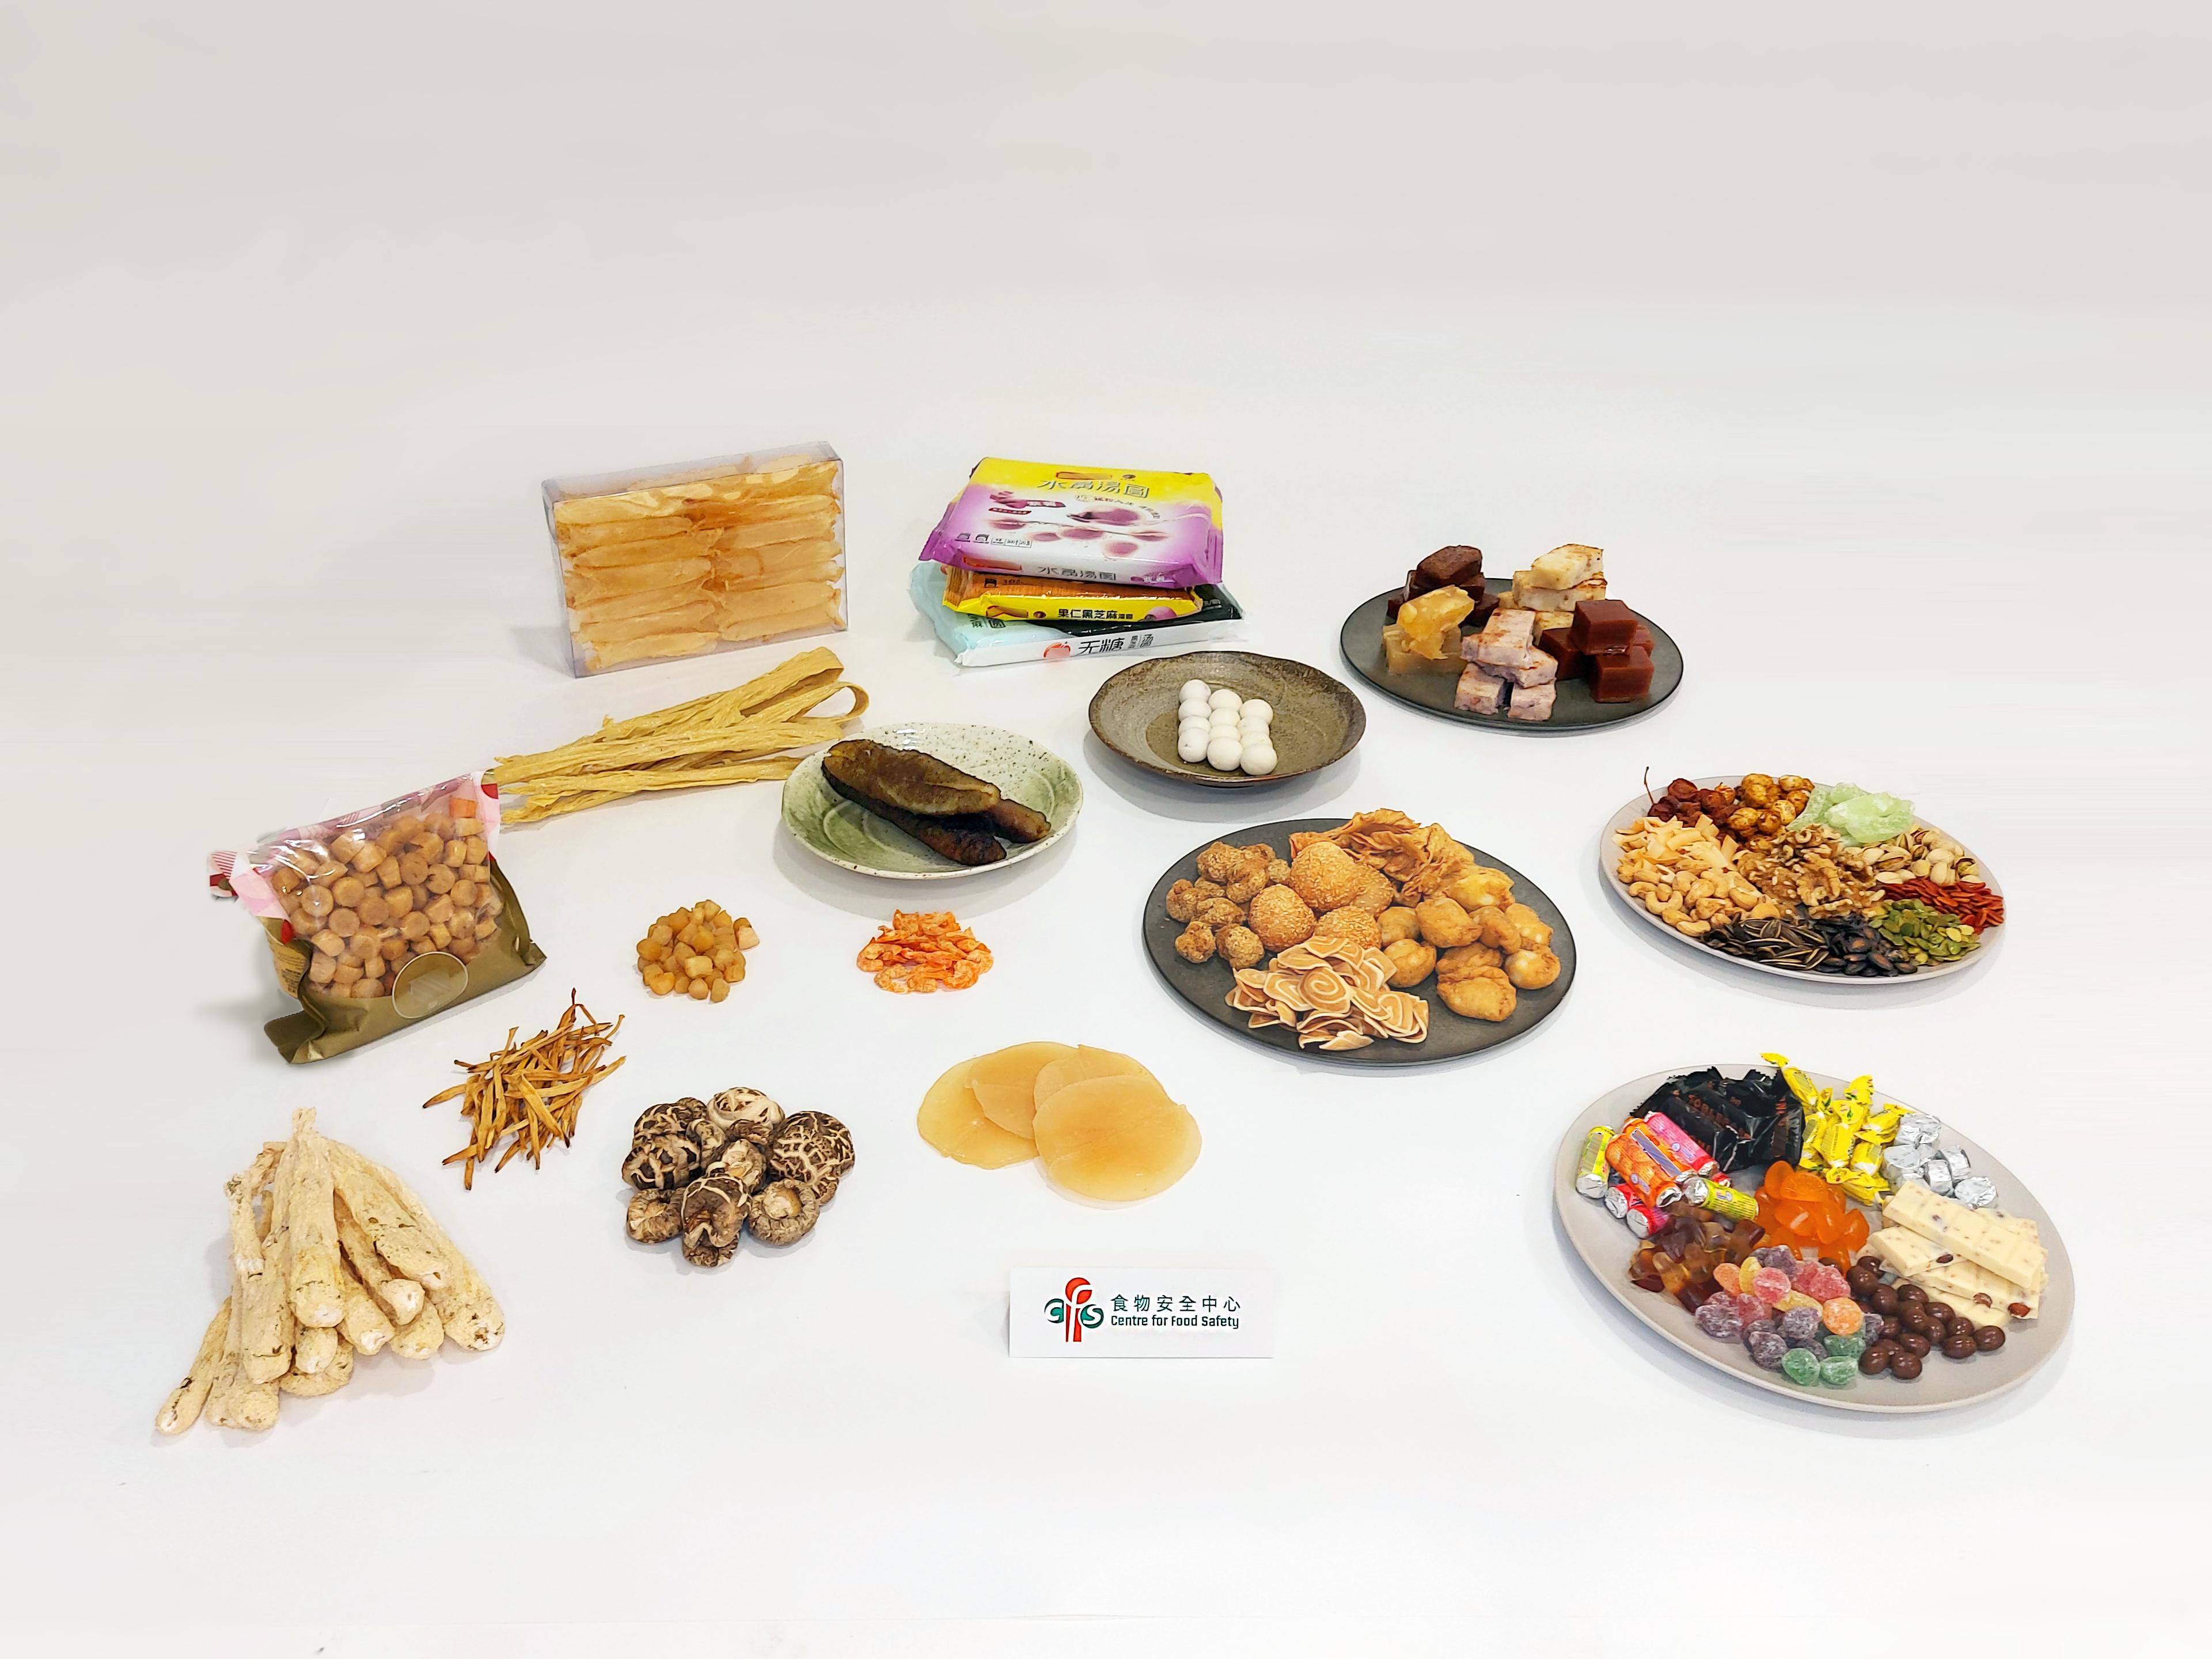 The Centre for Food Safety of the Food and Environmental Hygiene Department today (December 28) announced the test results of the seasonal food surveillance project on Lunar New Year food (first phase). Around 500 samples tested were satisfactory except for three samples that were announced earlier.